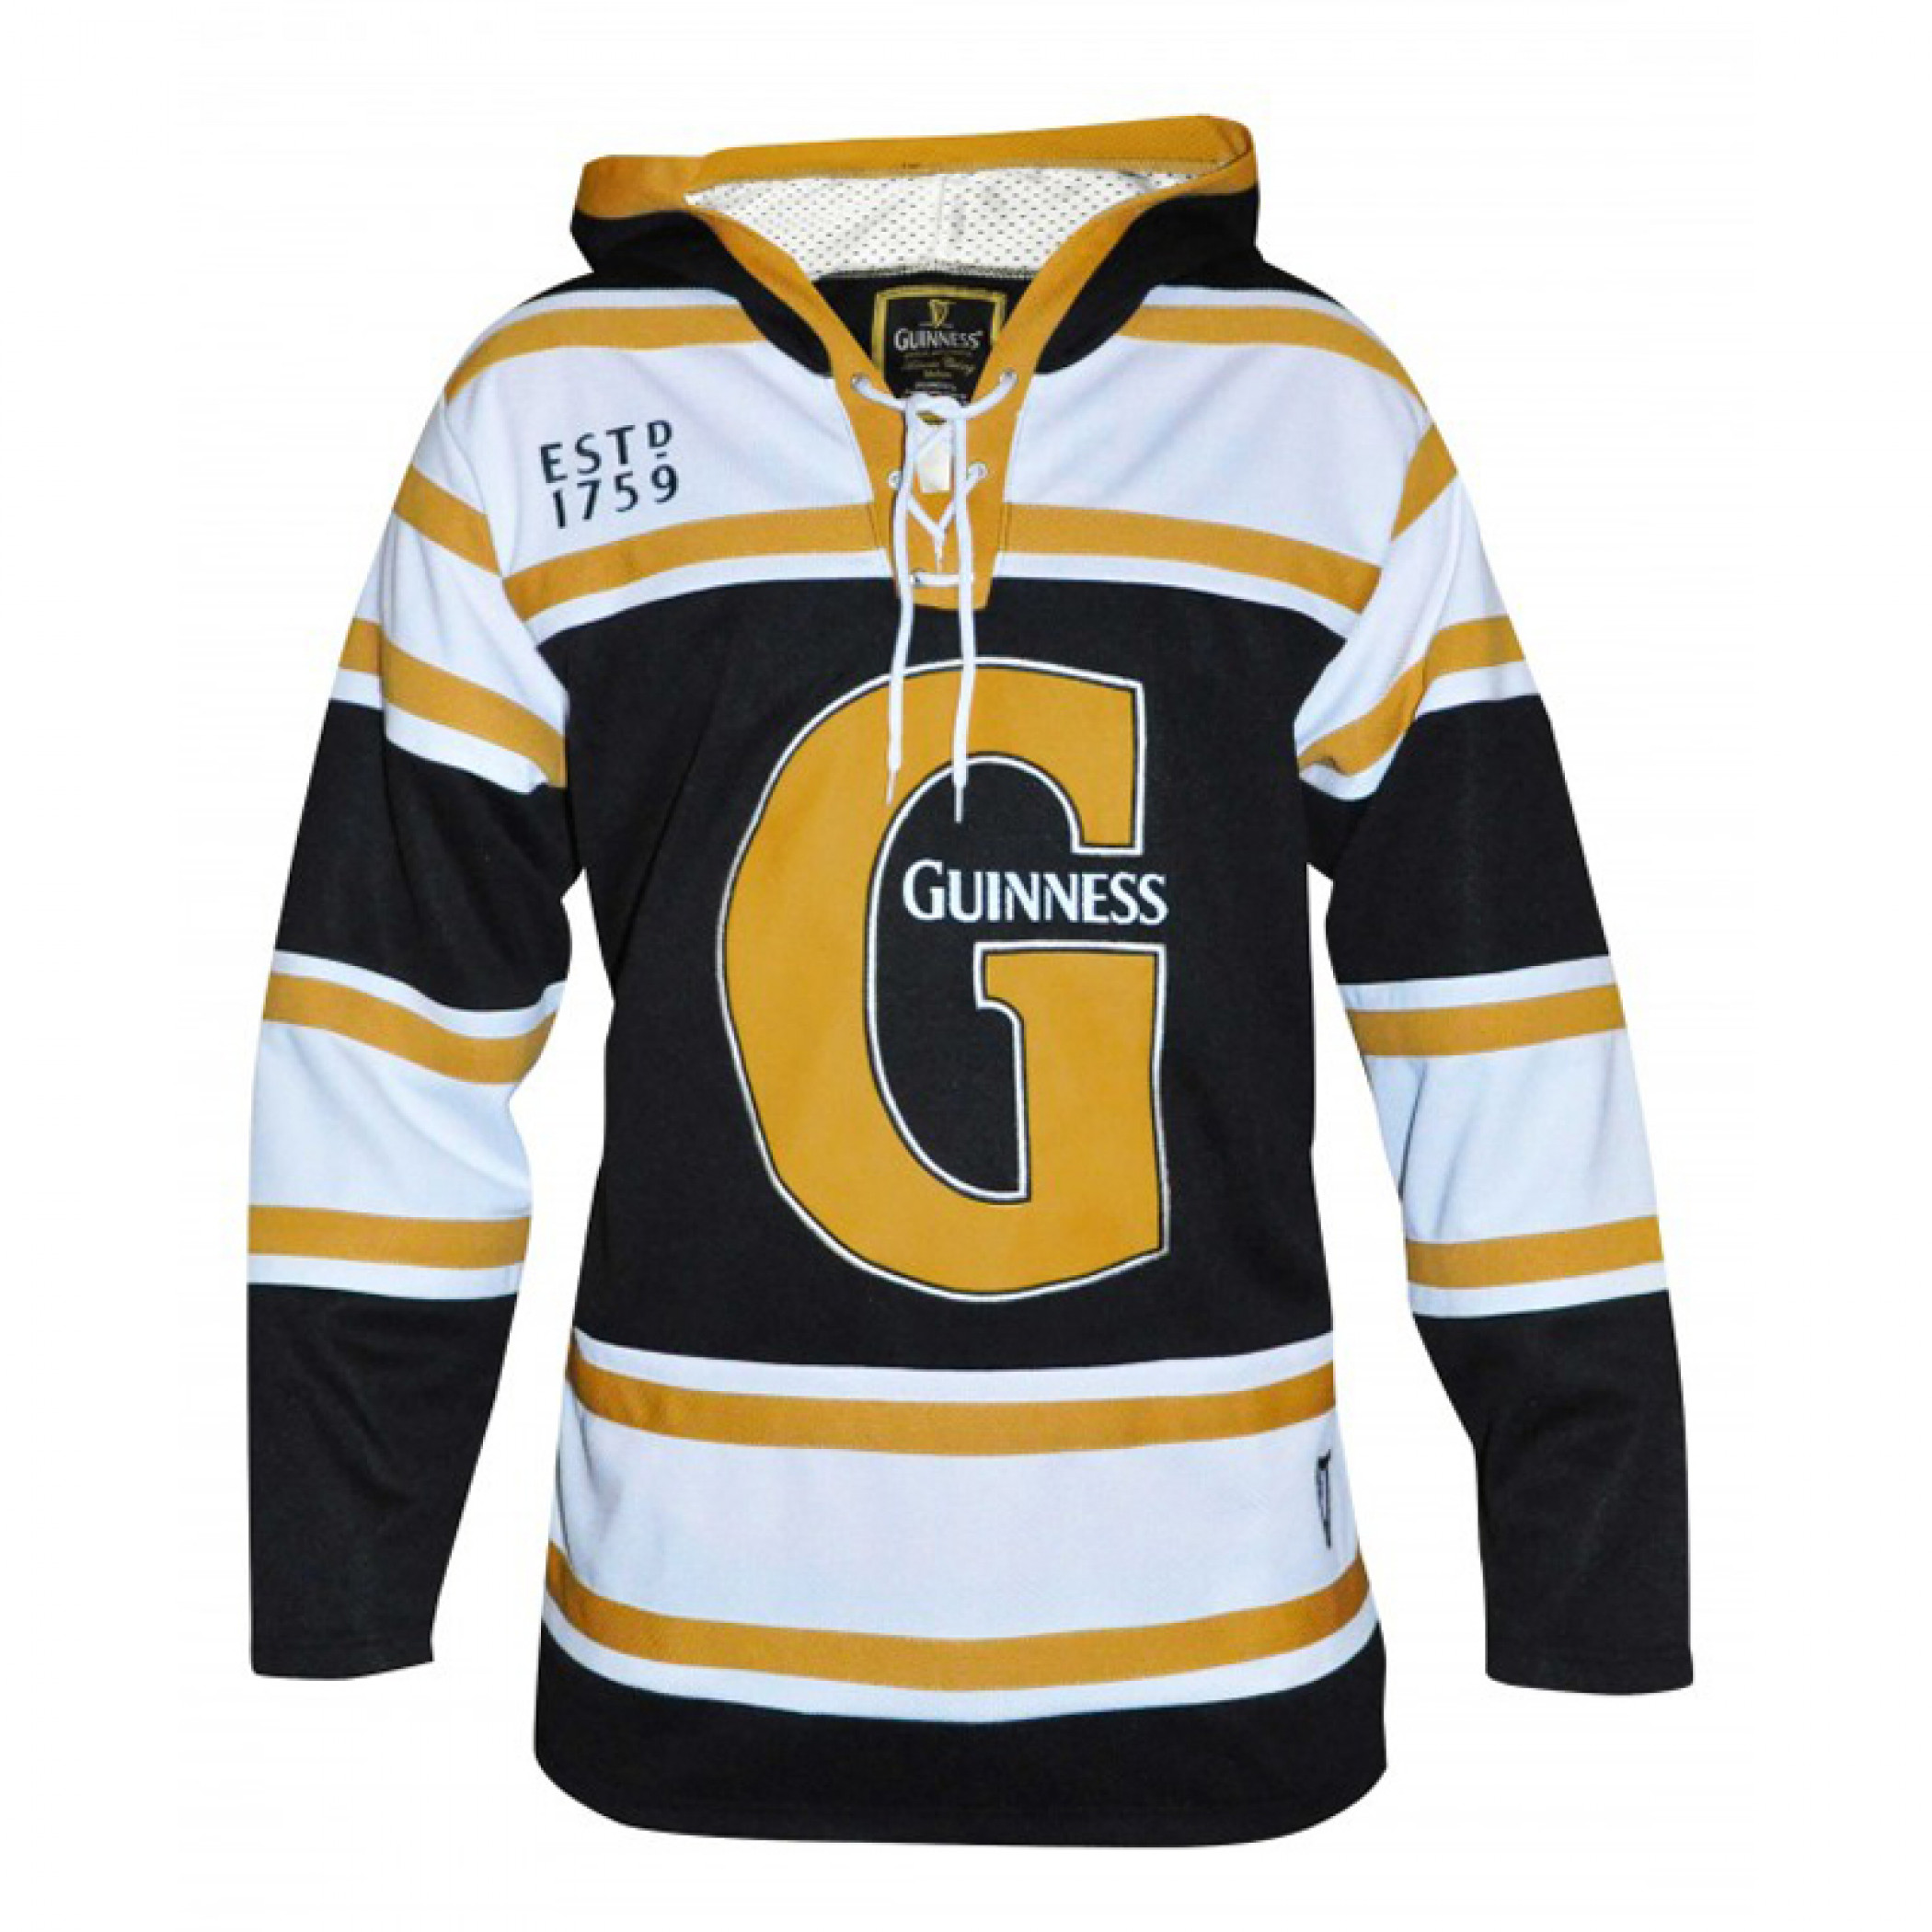 Guinness Black and Gold Hooded Hockey Jersey